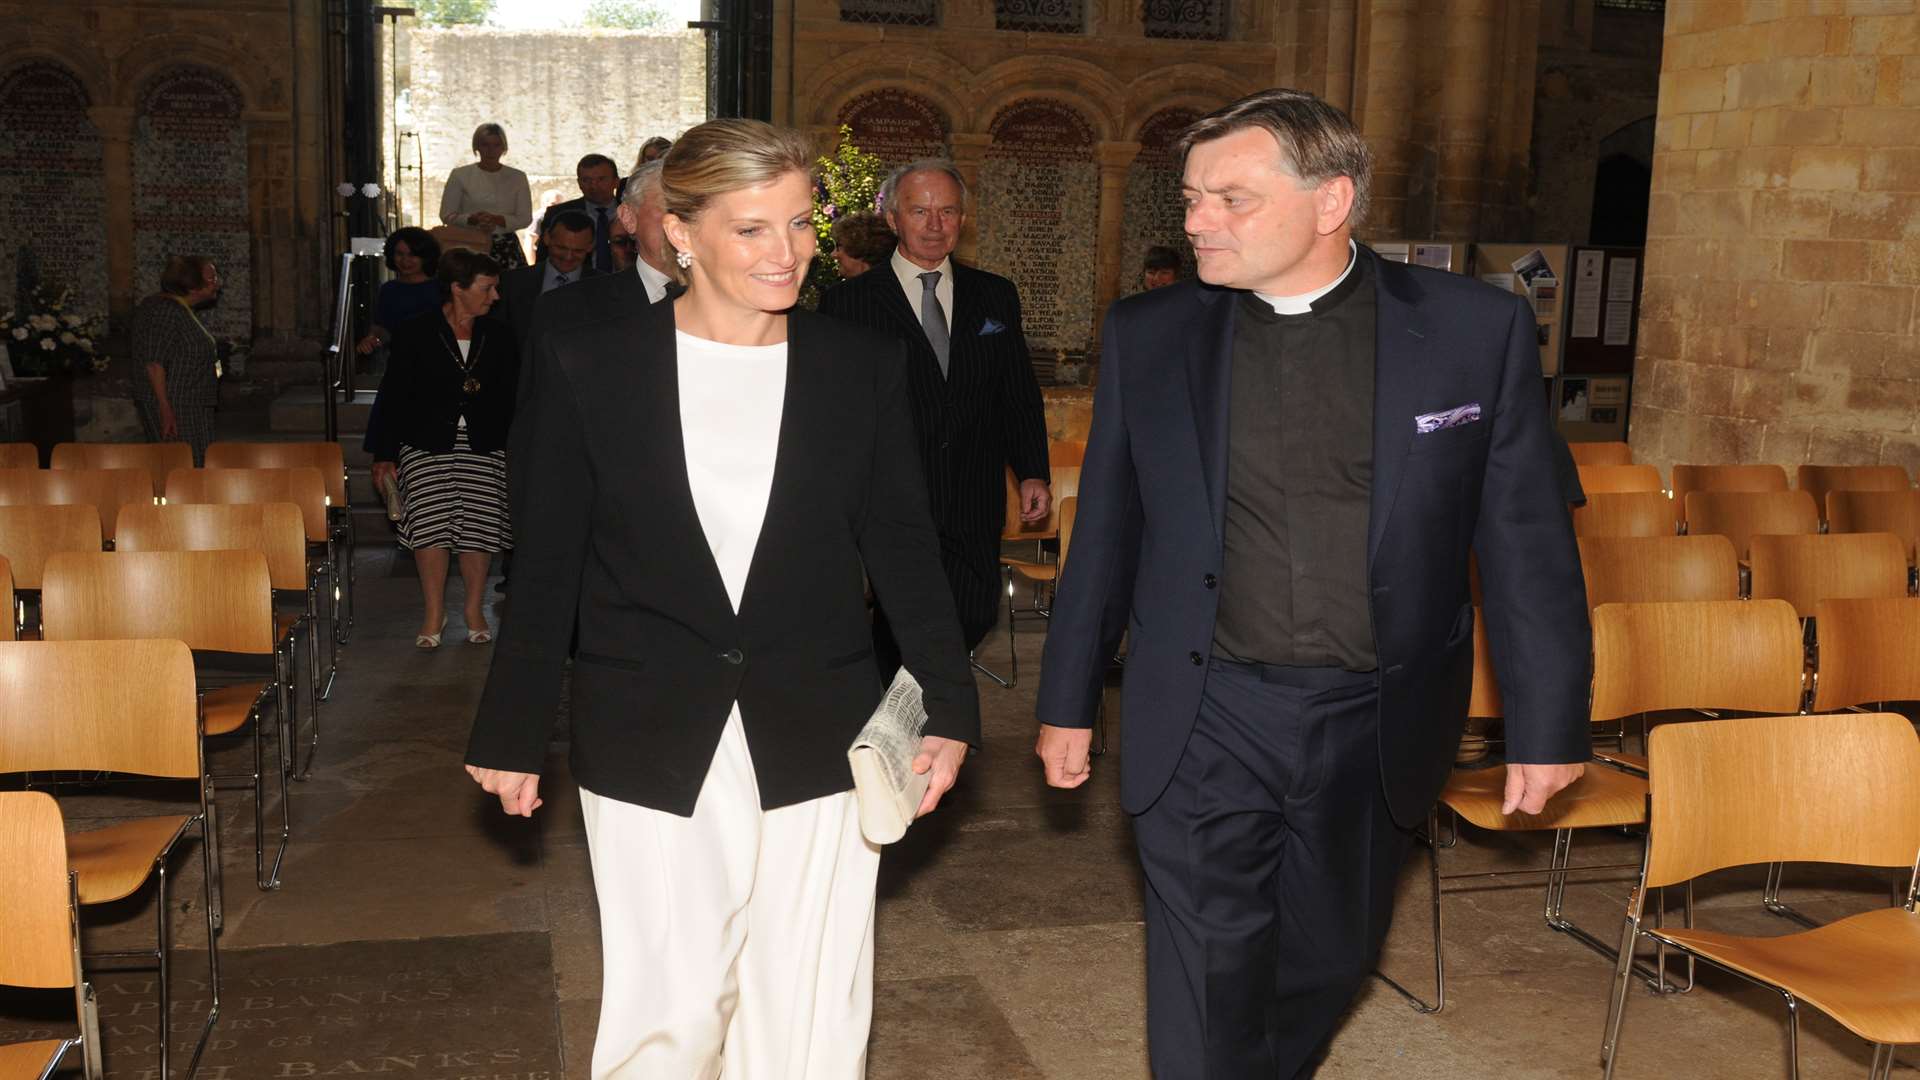 Acting Dean Phil Hesketh with the Countess of Wessex when she visited the cathedral earlier this year.